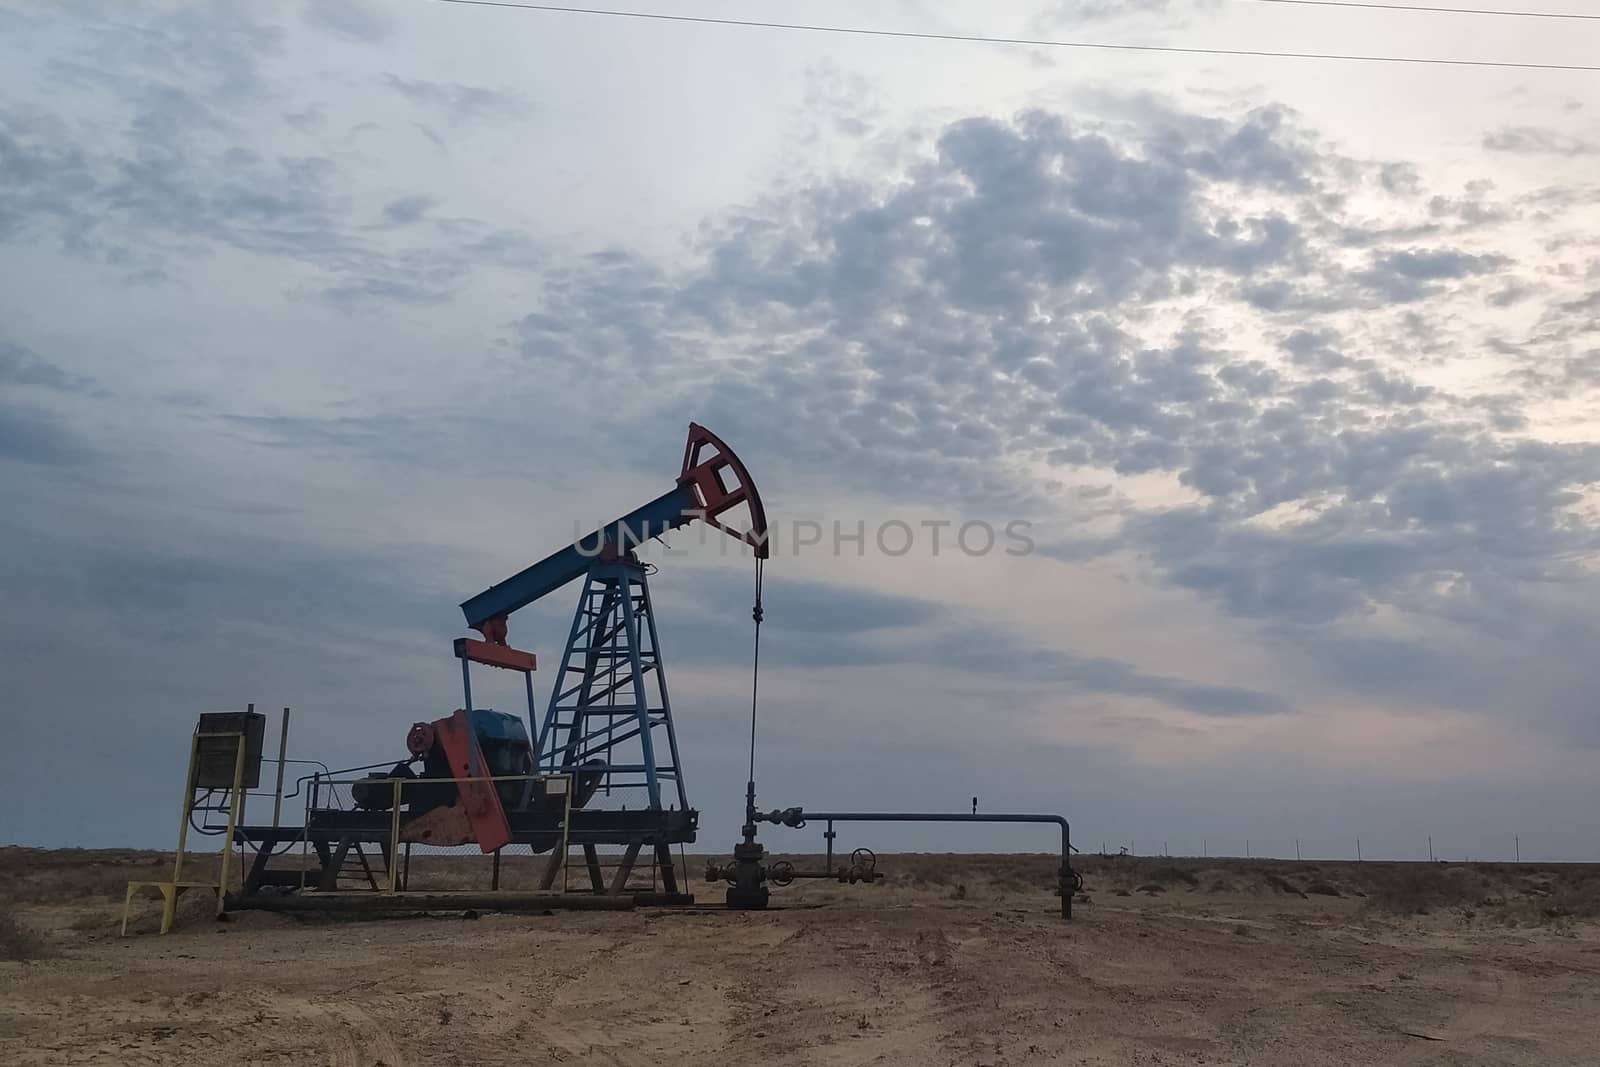 rocking machine on an oil well. Oil production. by DePo